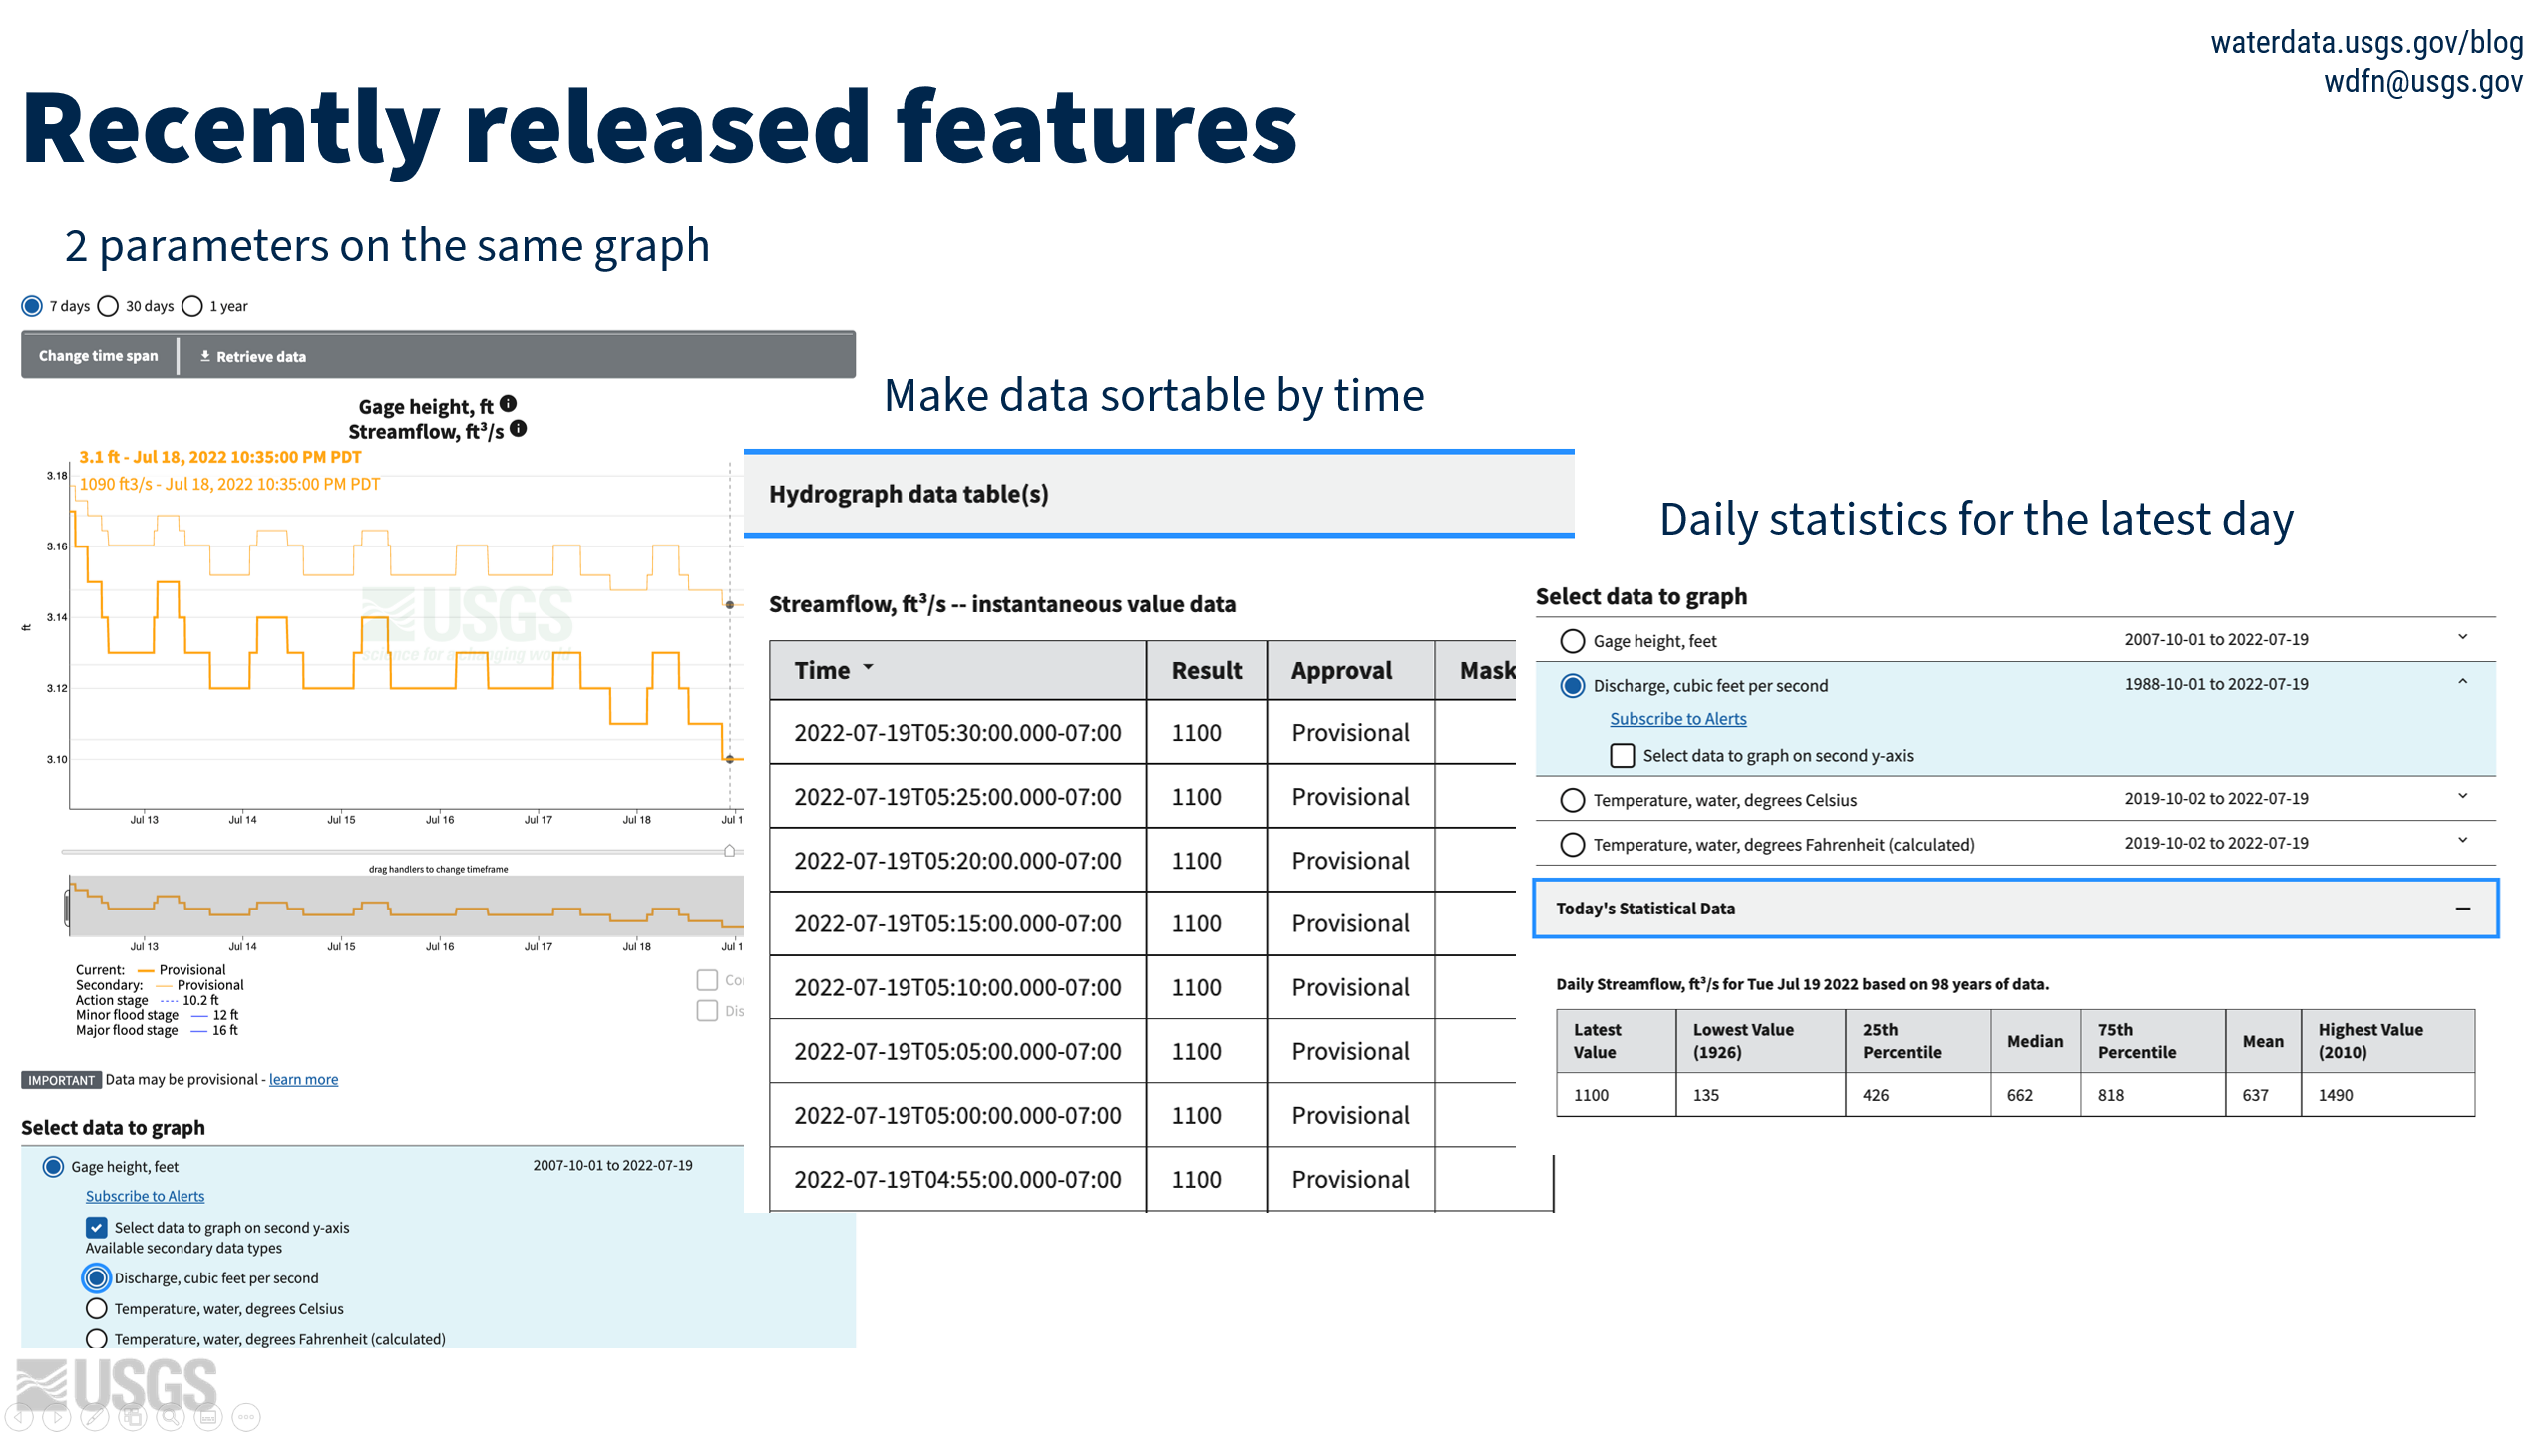 screenshot of 3 recently released features: 2 parameters on the same graph, make data sortable by time, daily statistics for the latest day.